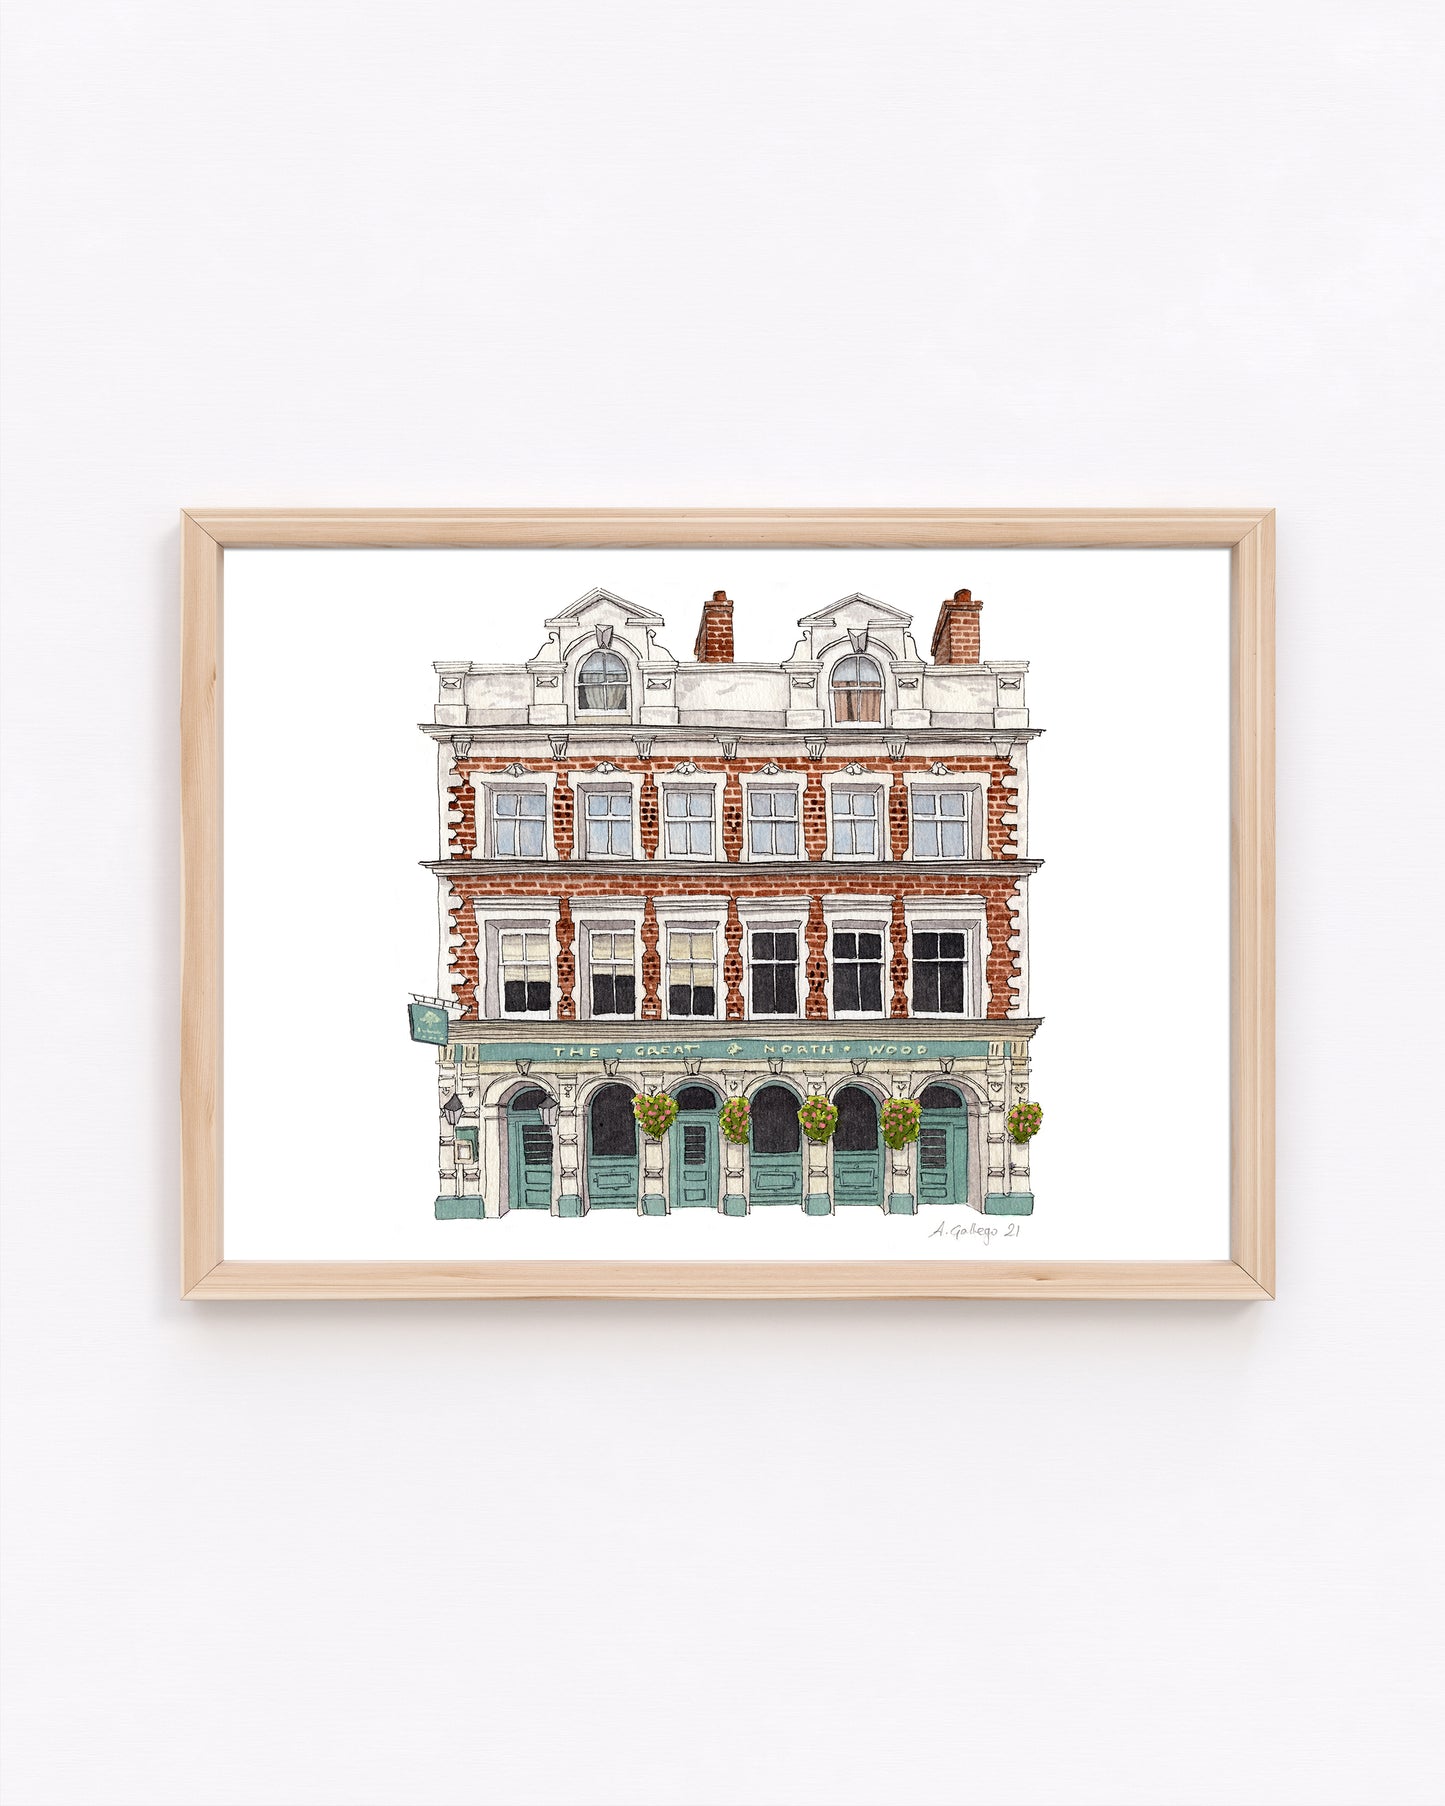 West Norwood - The Great North Wood Pub - Giclée Print (unframed)